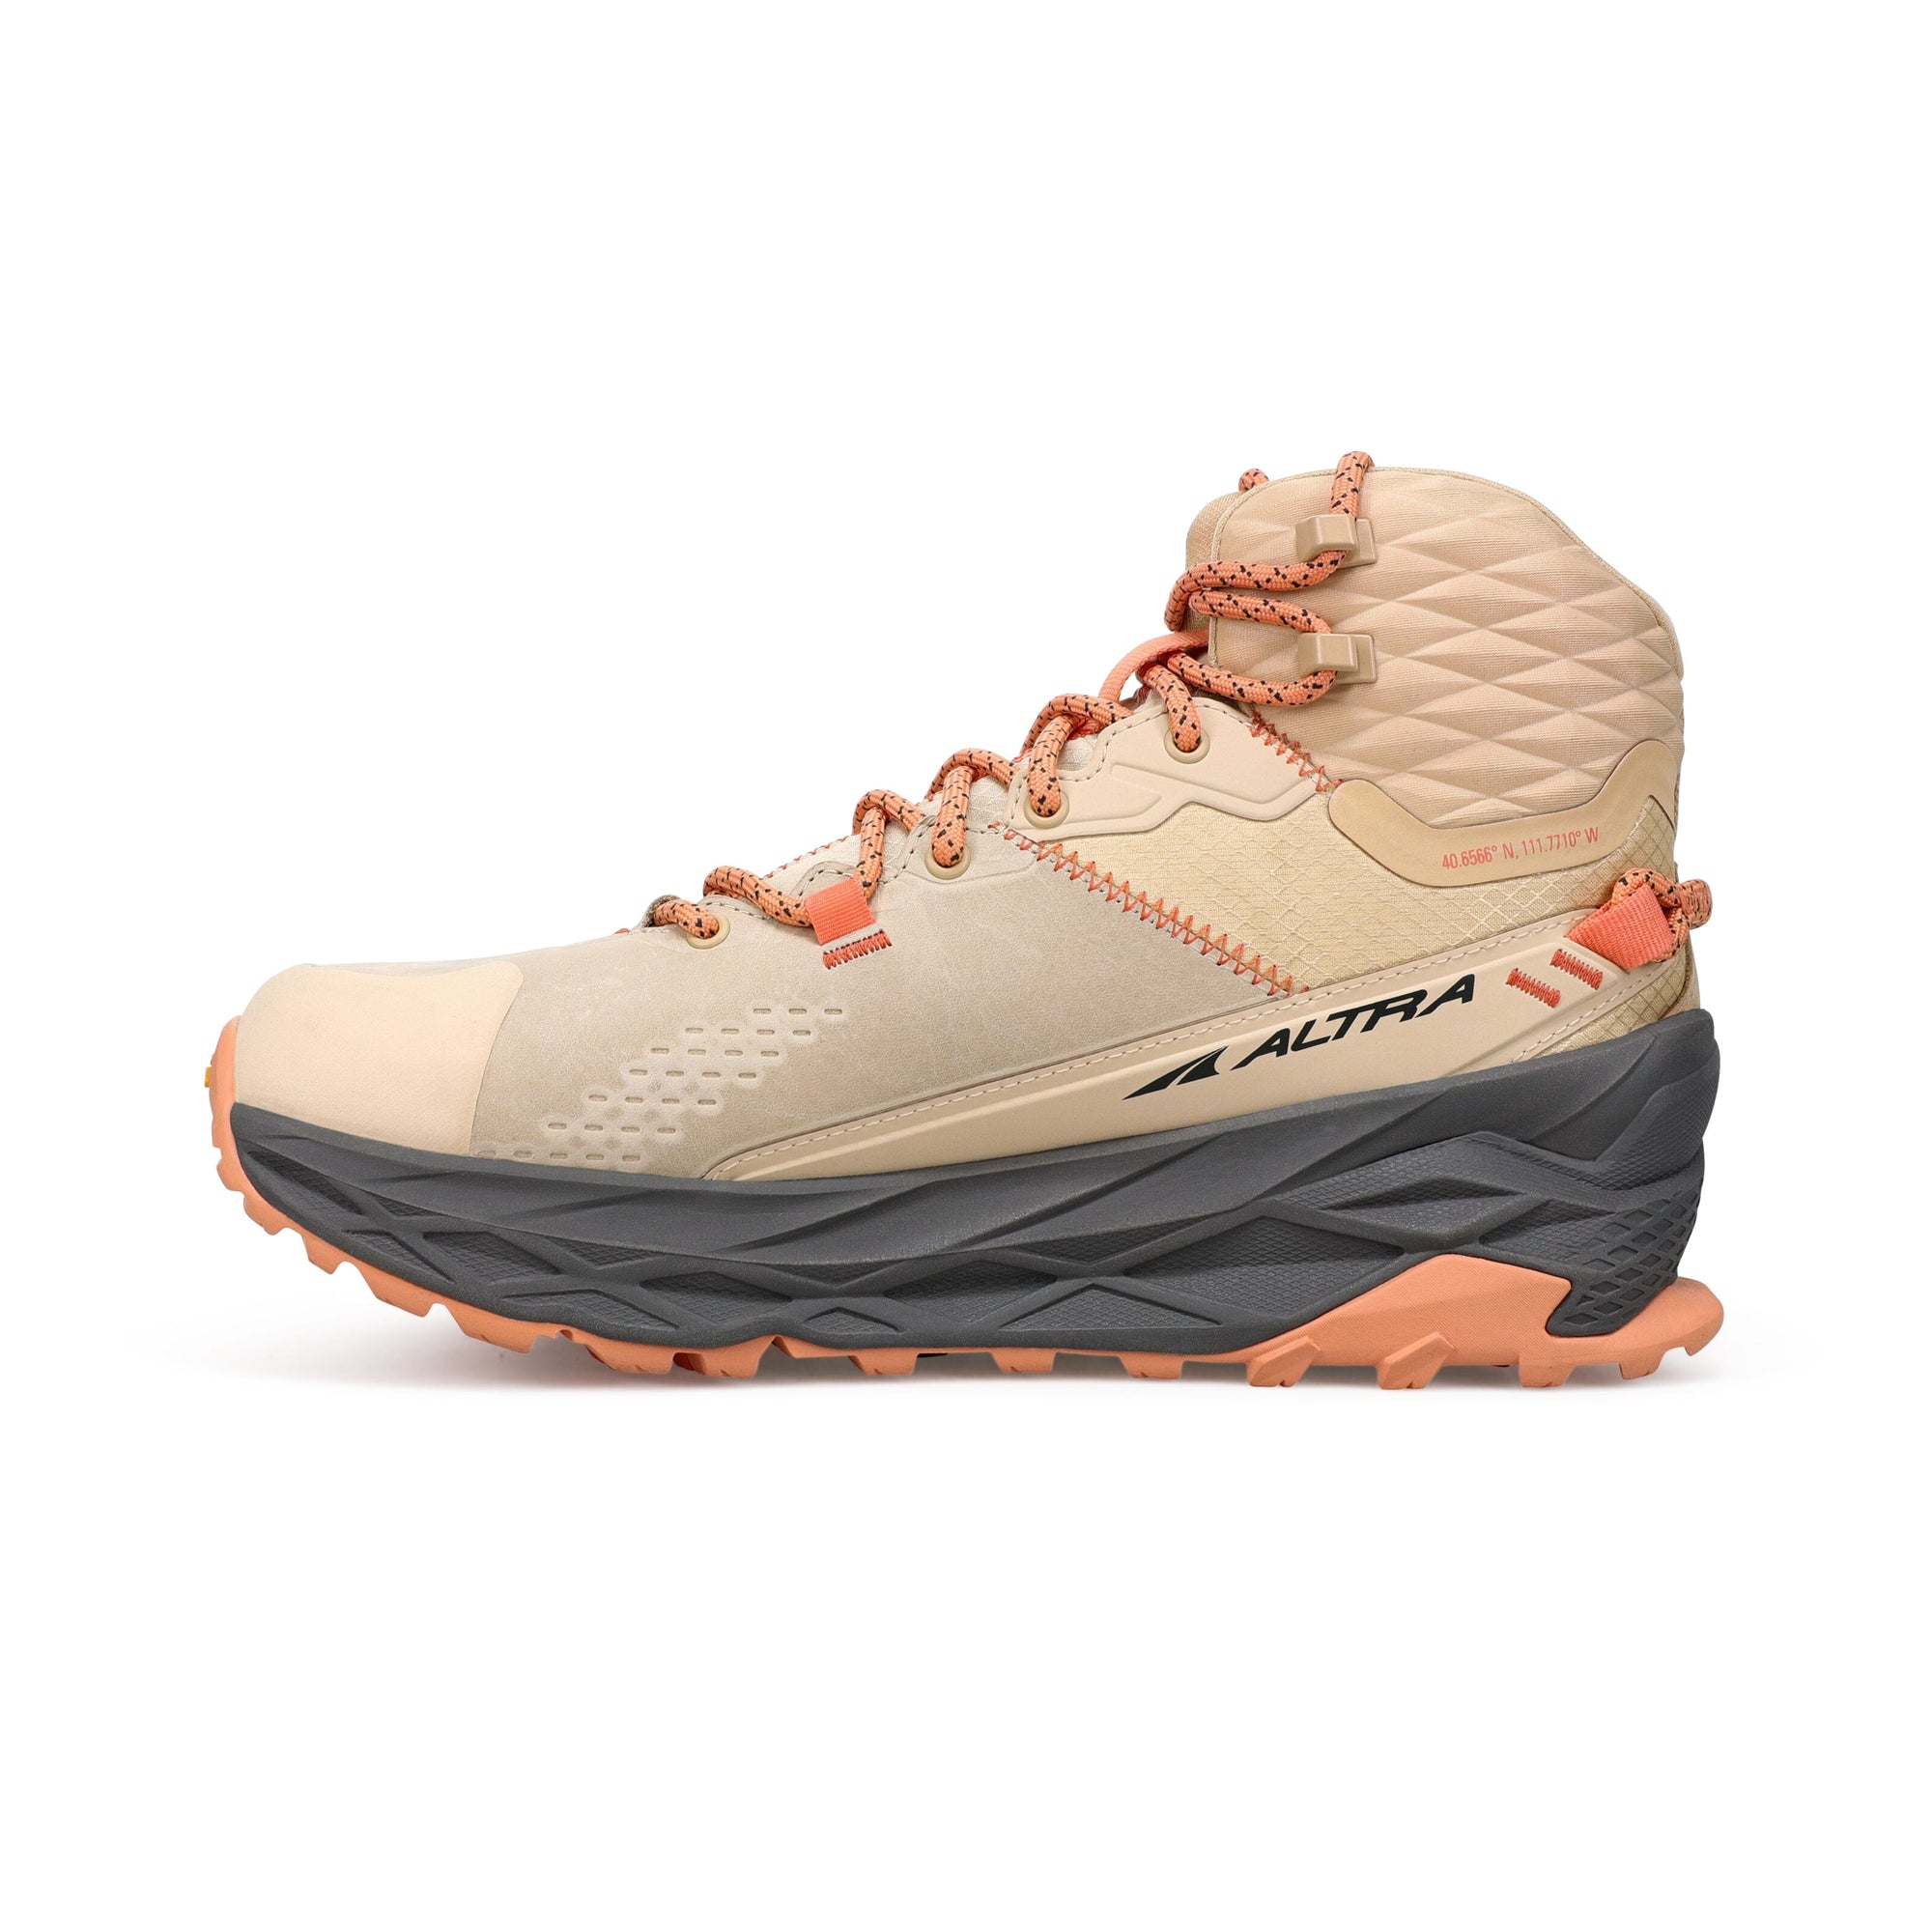 Altra Women's Olympus 5 Hike Mid GTX Hiking Shoes Sand US 5.5 | EUR 36 | UK 3.5 